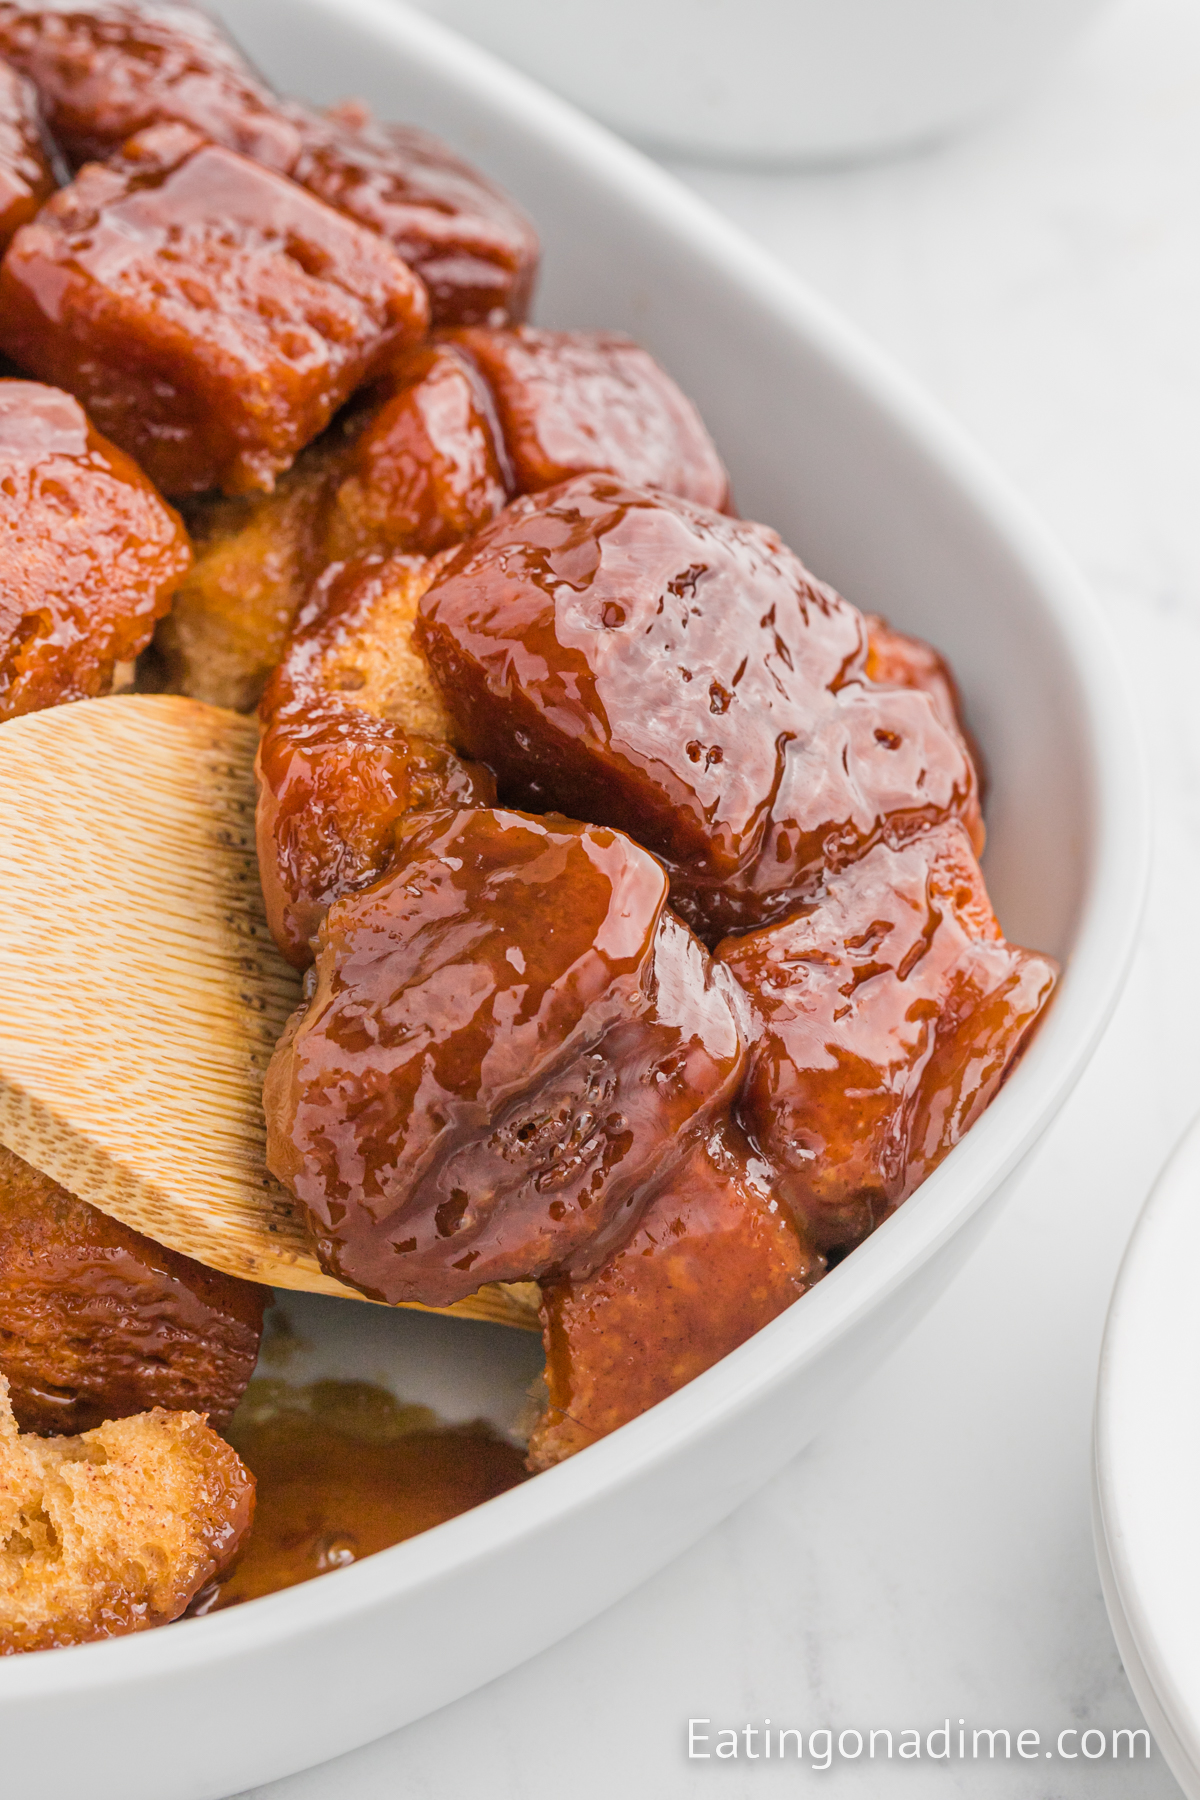 Monkey bread in a baking dish with a wooden spoon